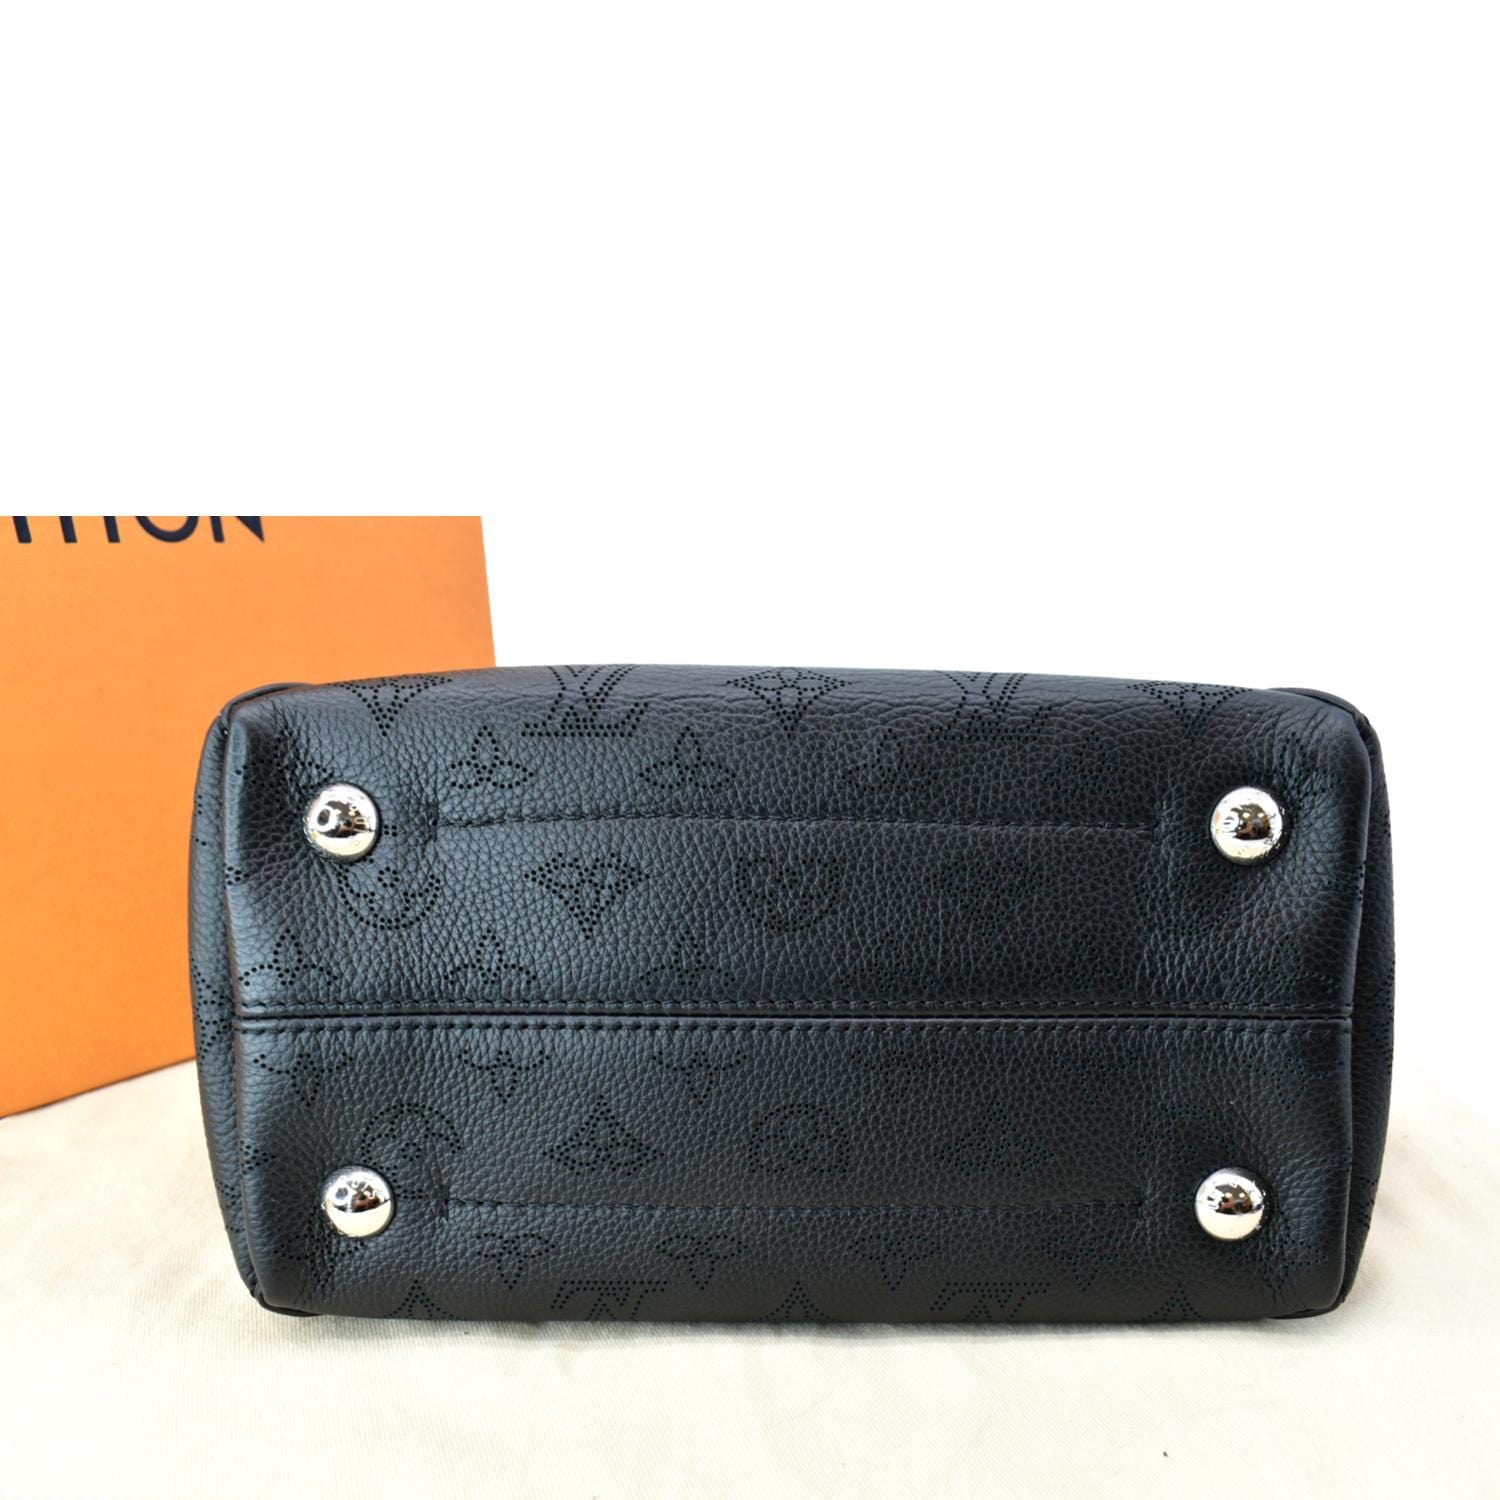 Louis+Vuitton+Hina+Tote+MM+Black+Leather for sale online